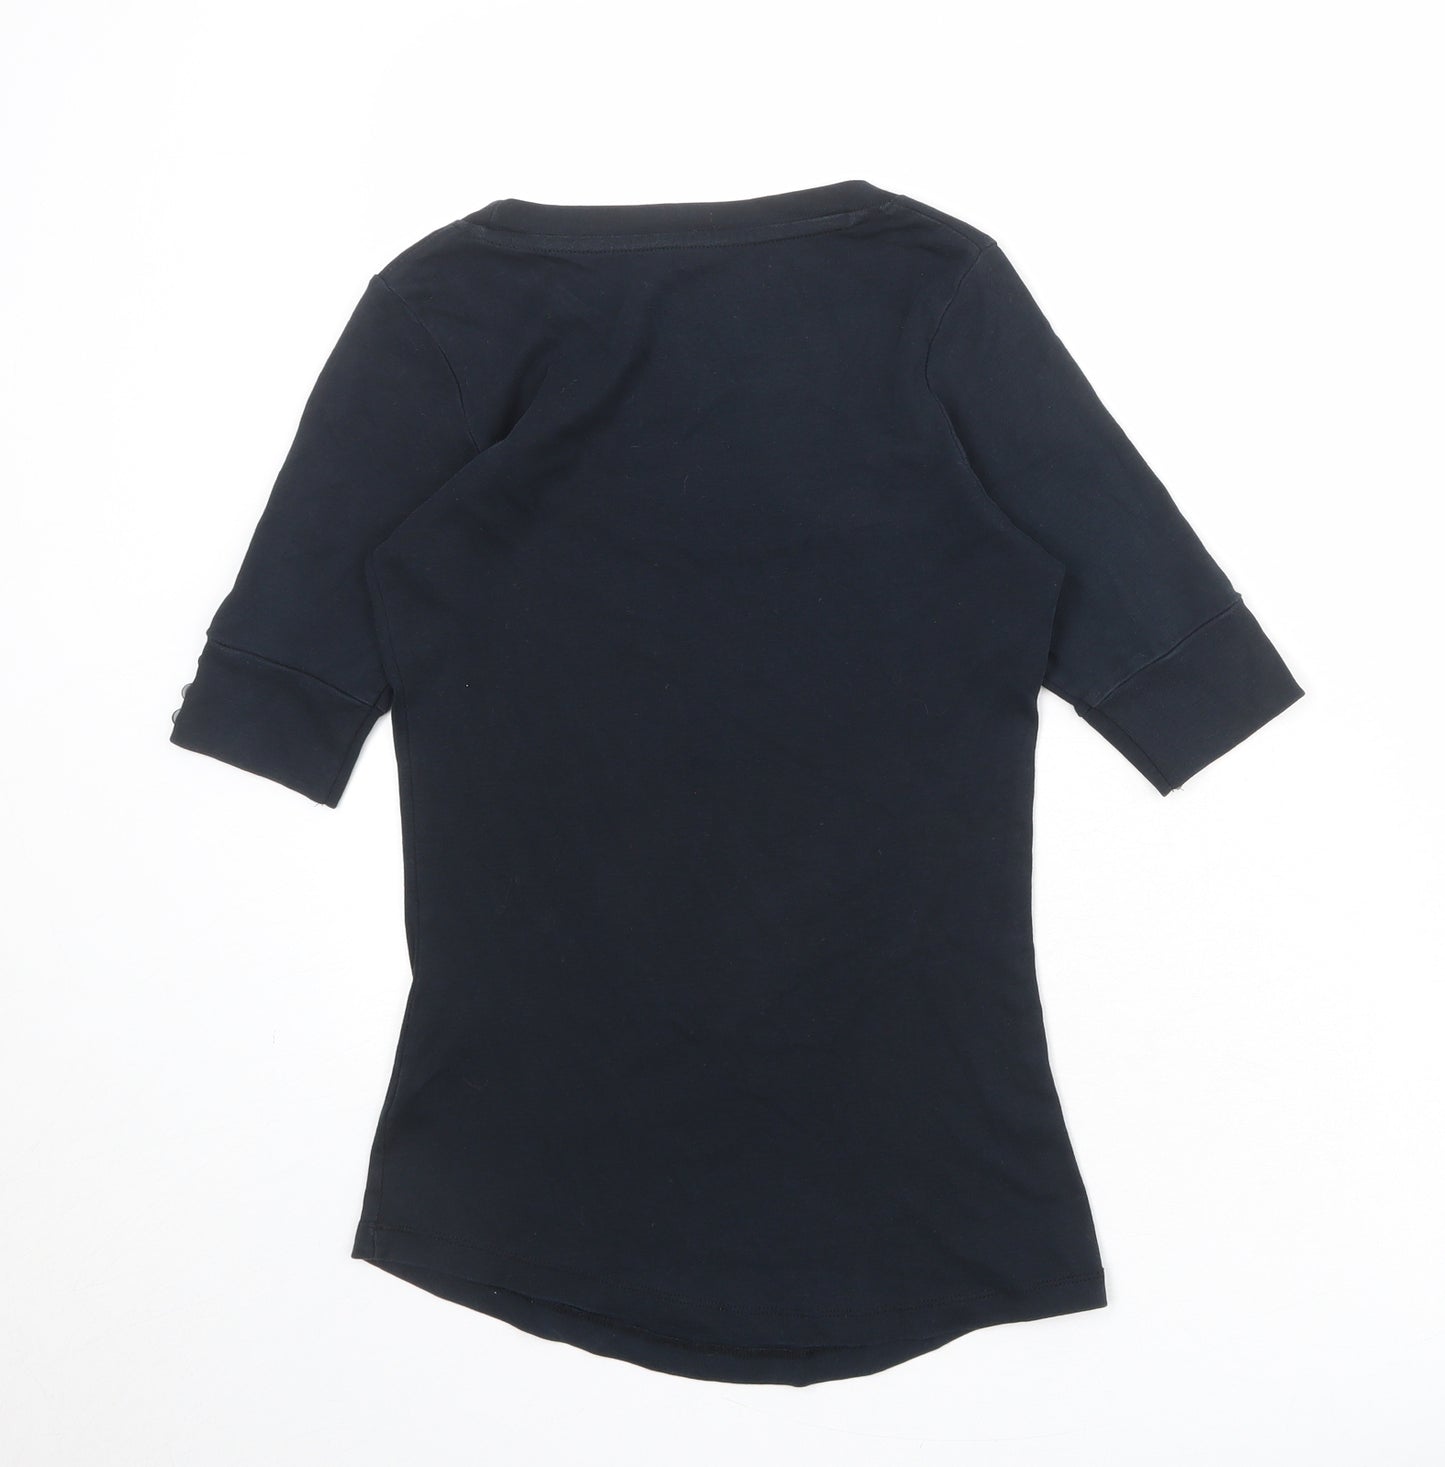 New Look Womens Black 100% Cotton Basic T-Shirt Size 10 Scoop Neck